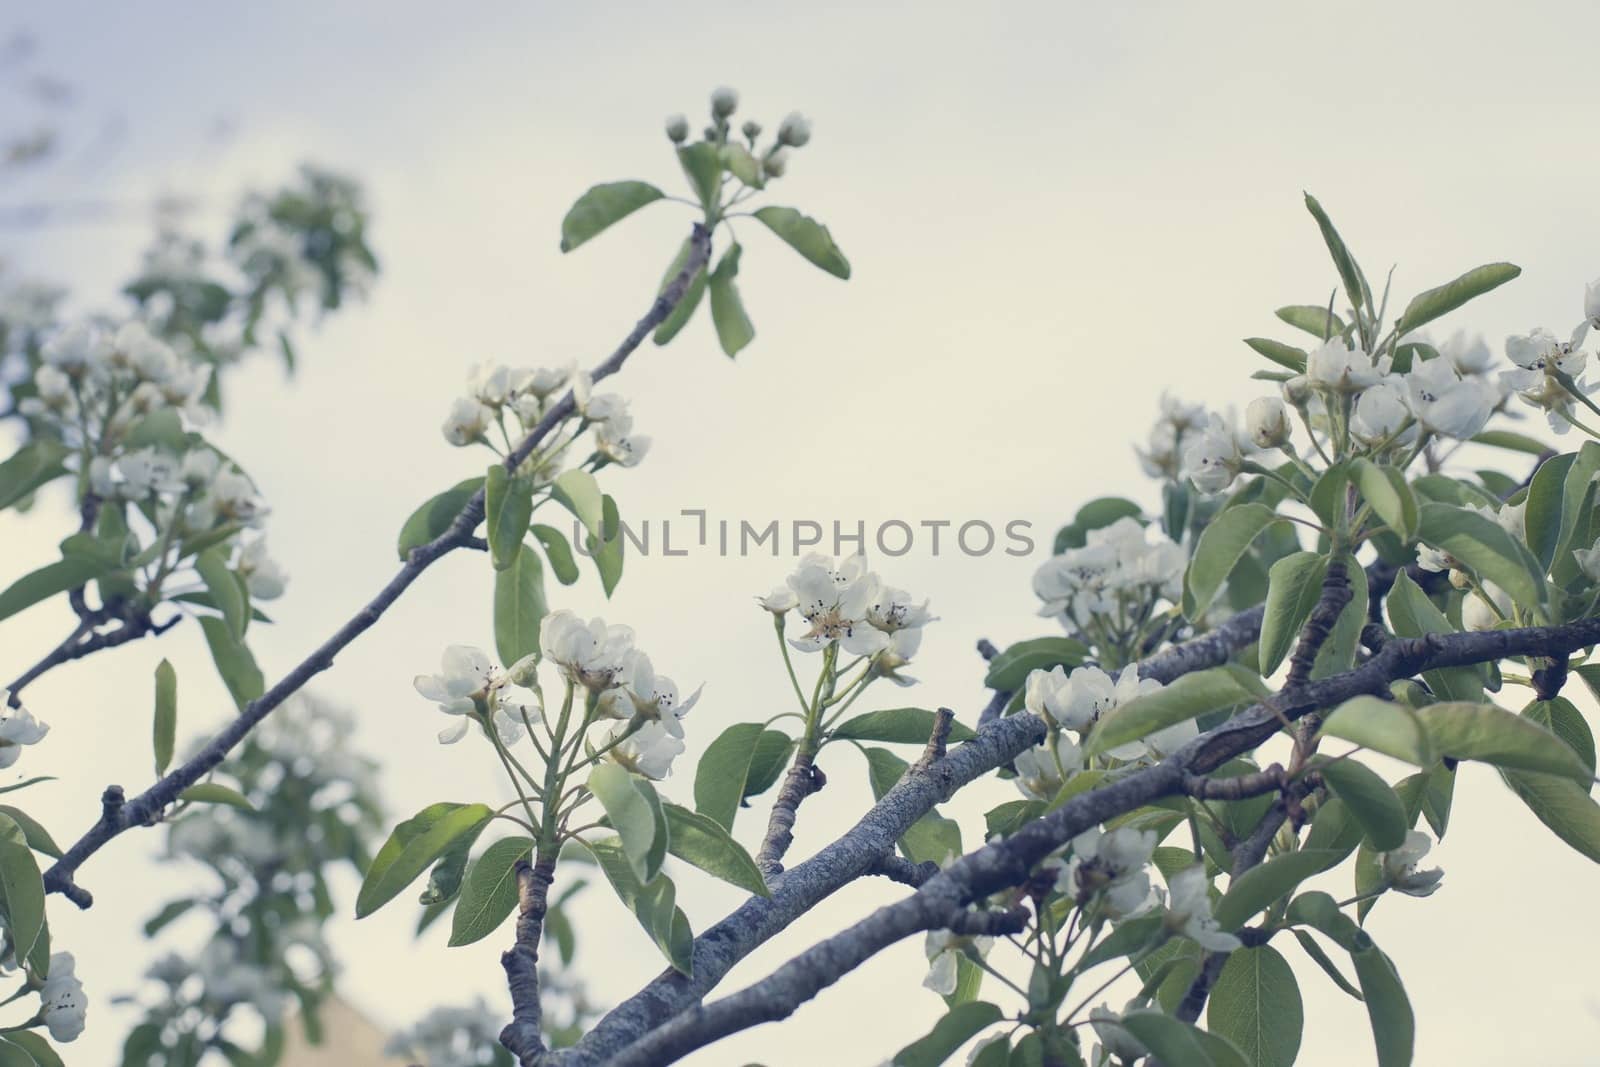 Pear tree blossoms against the sky, vintage tones